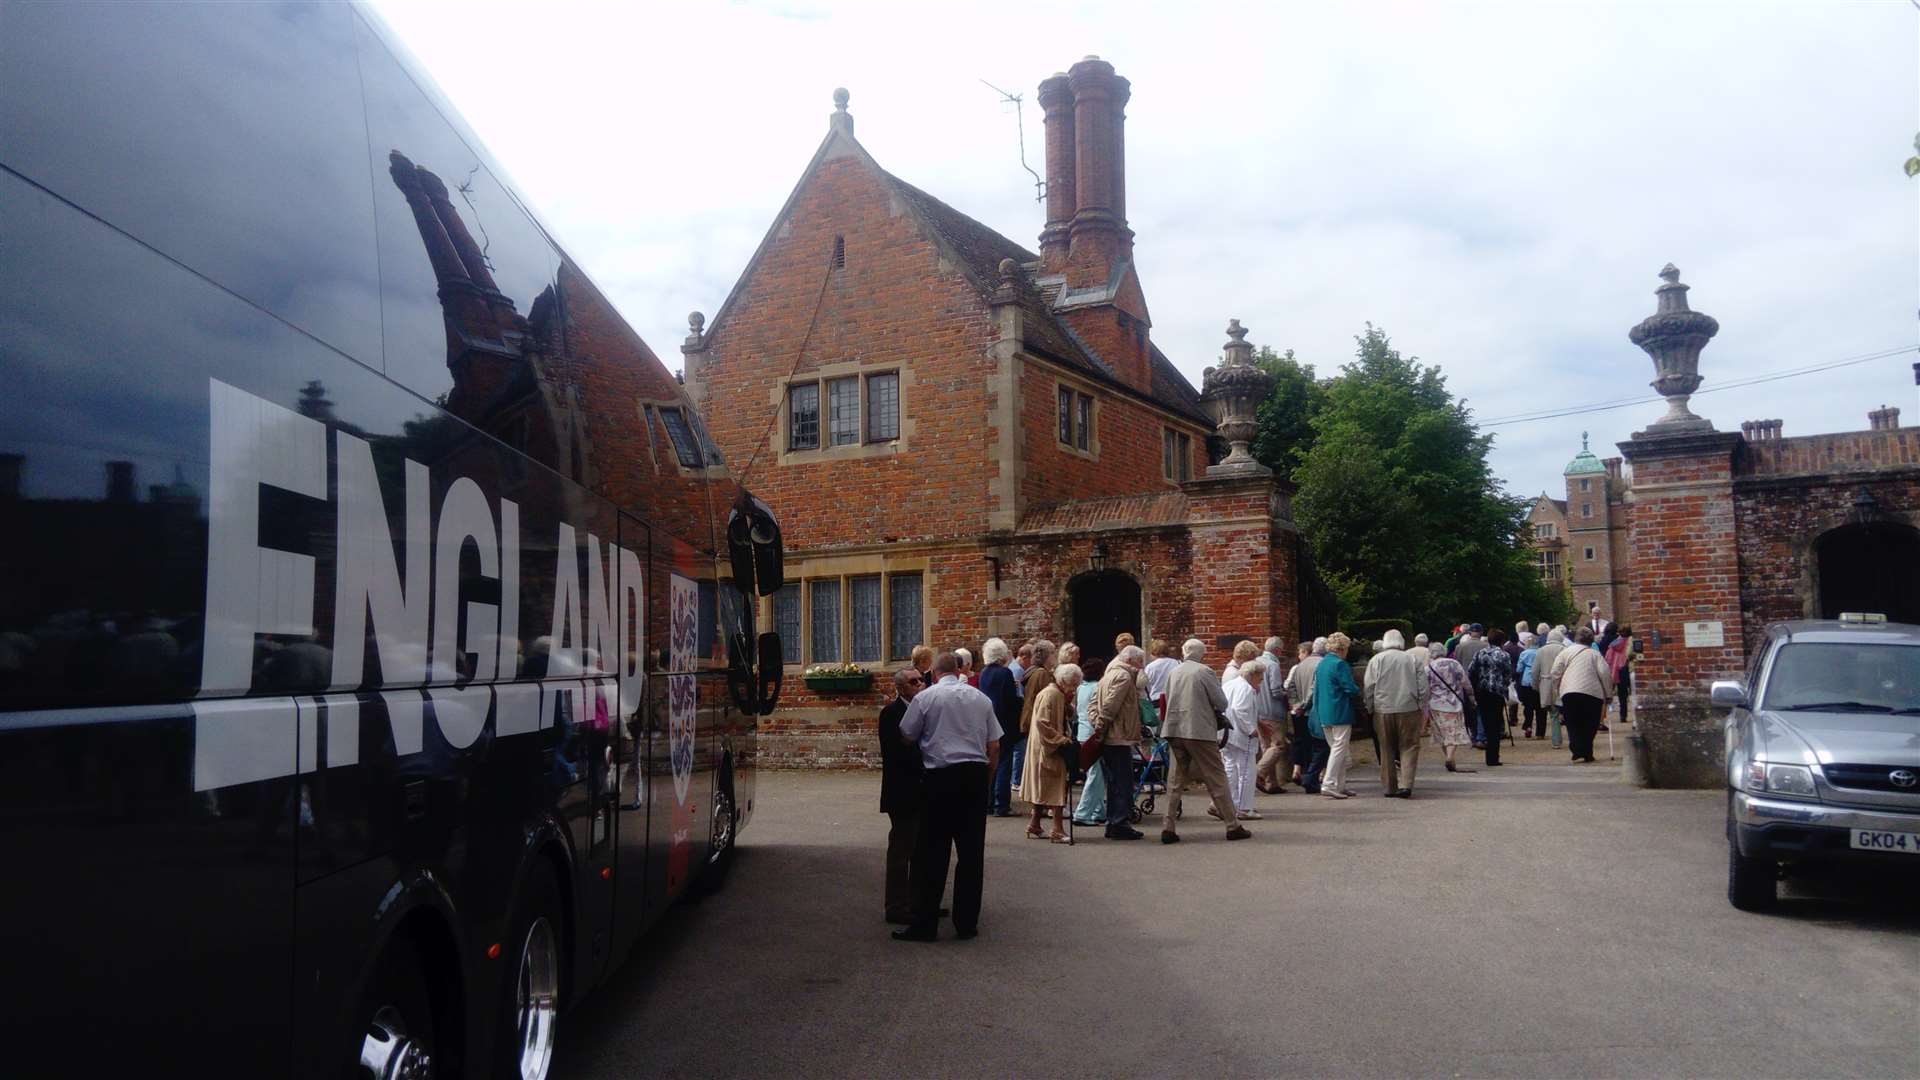 Pensioners make their way to Chilham Castle